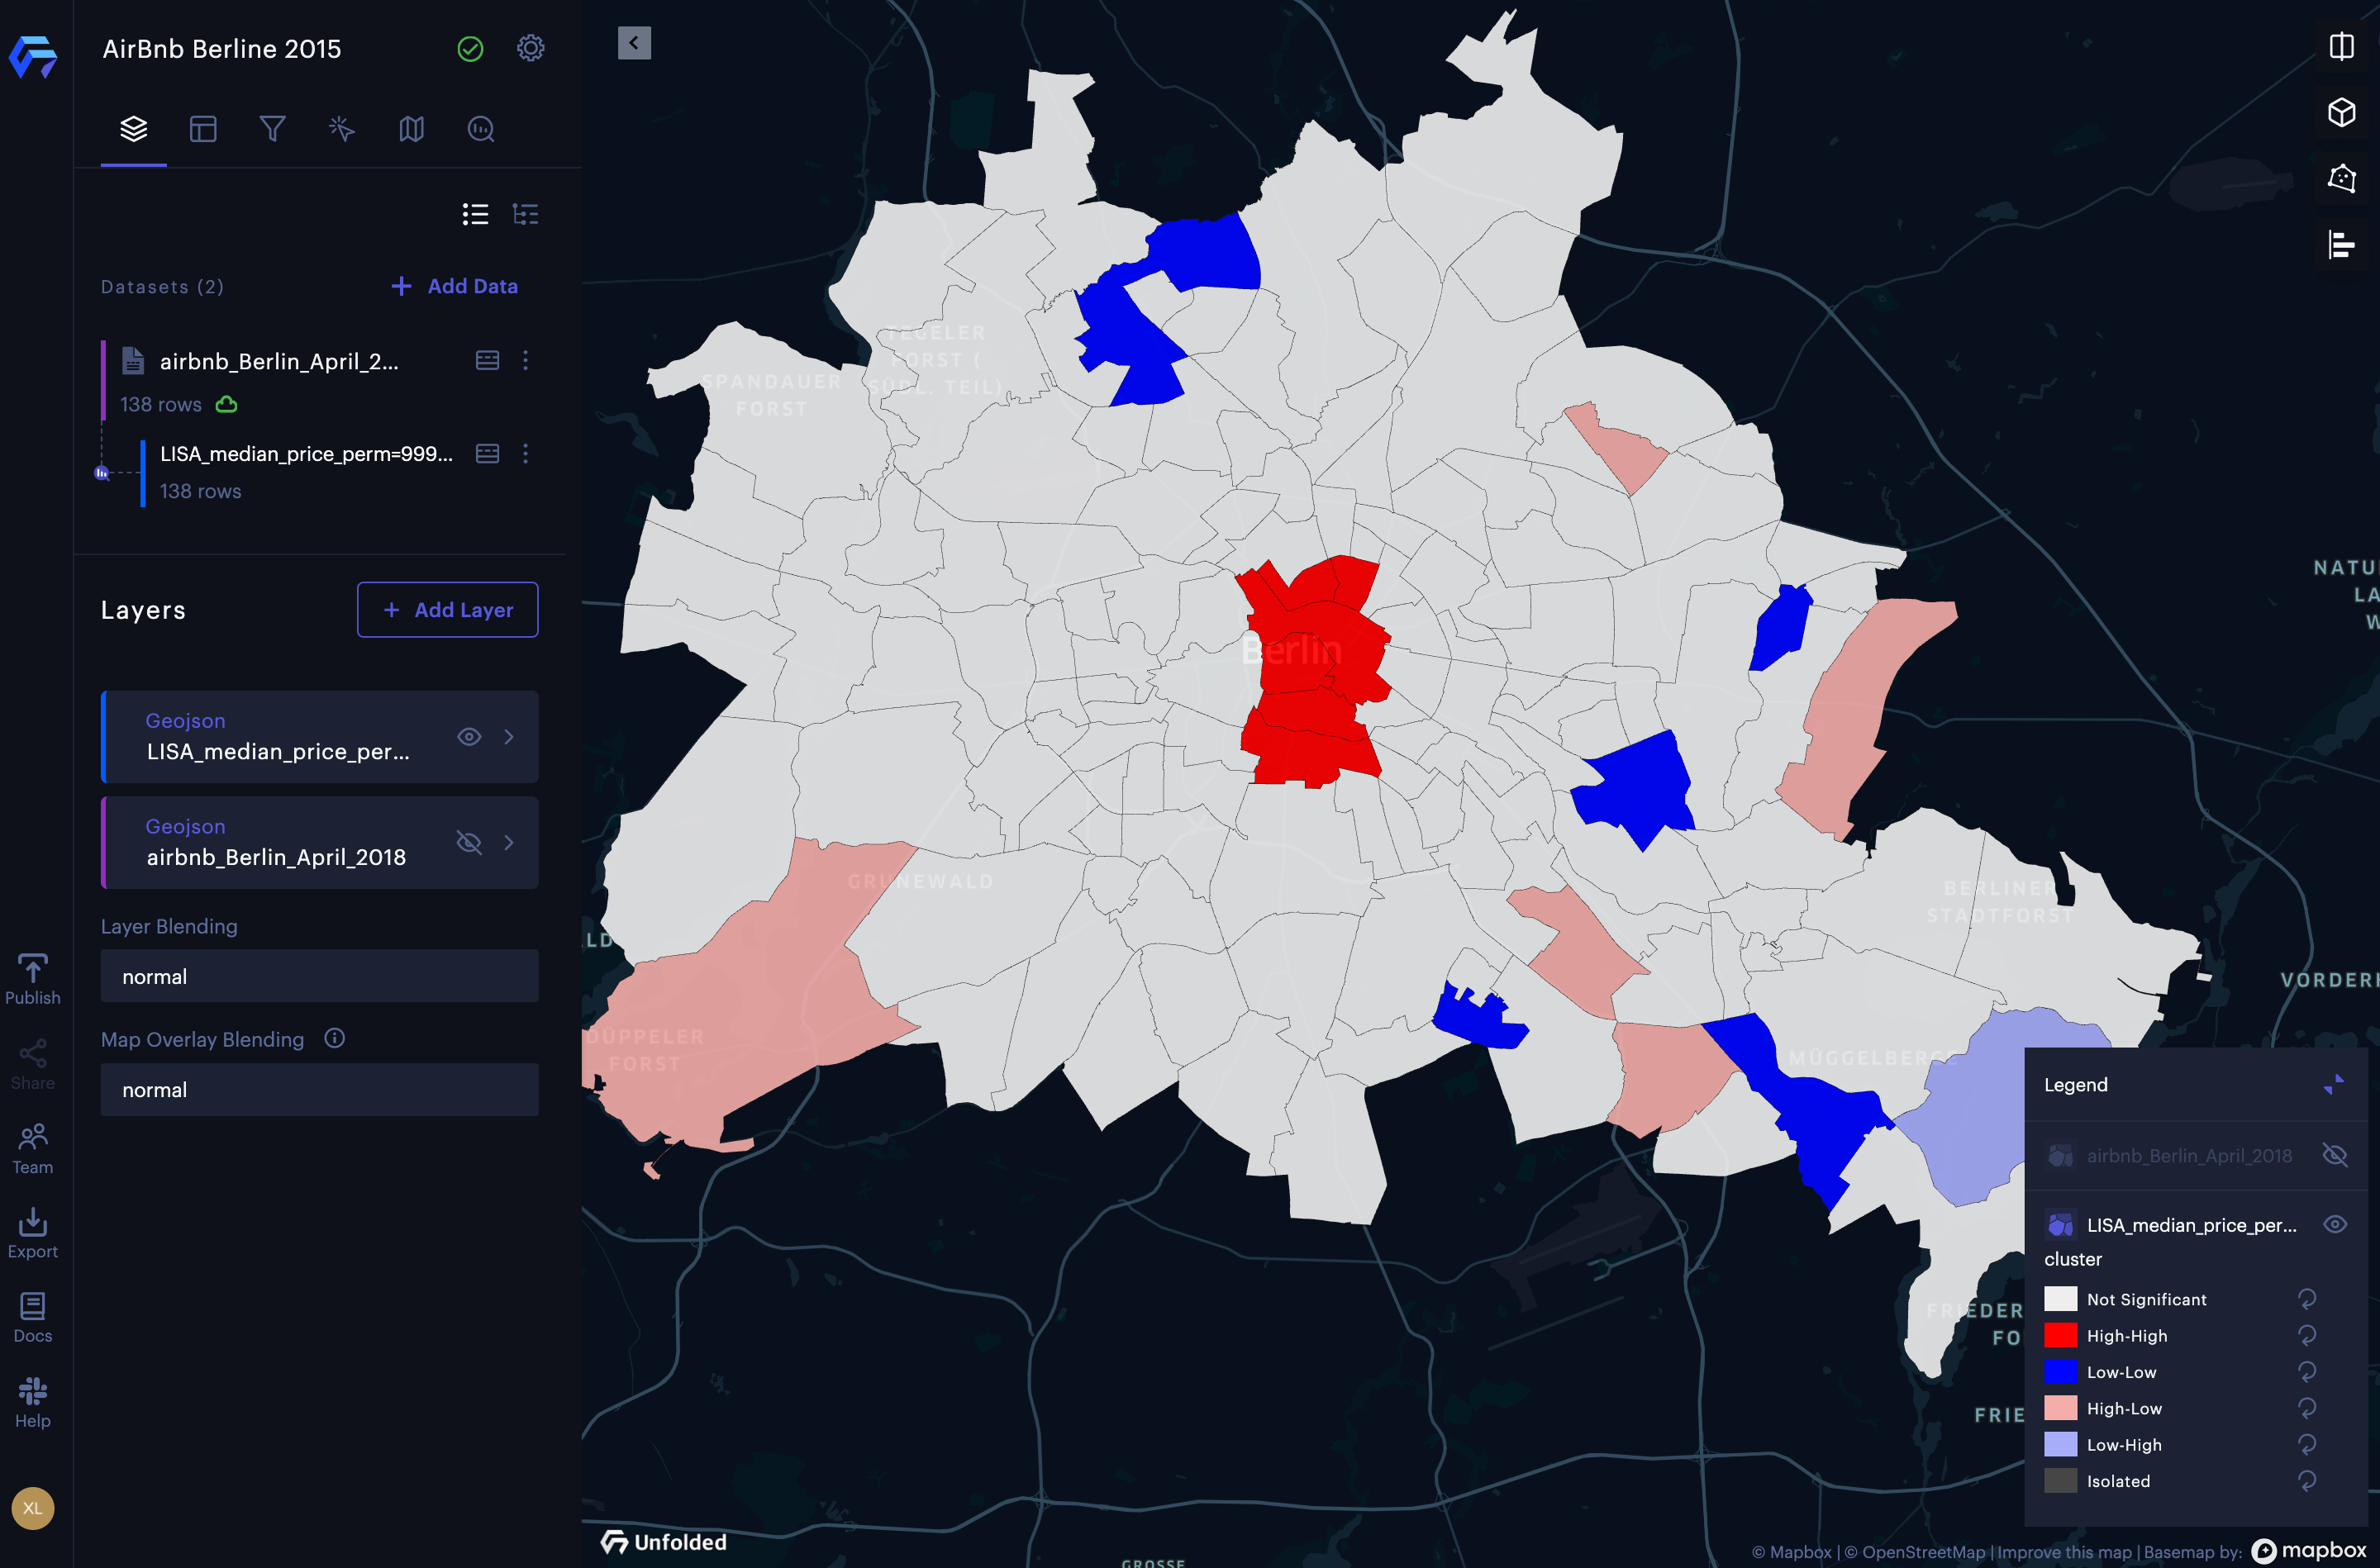 The result of cluster and outlier analysis of the median listing price of Airbnb rentals in Berlin.